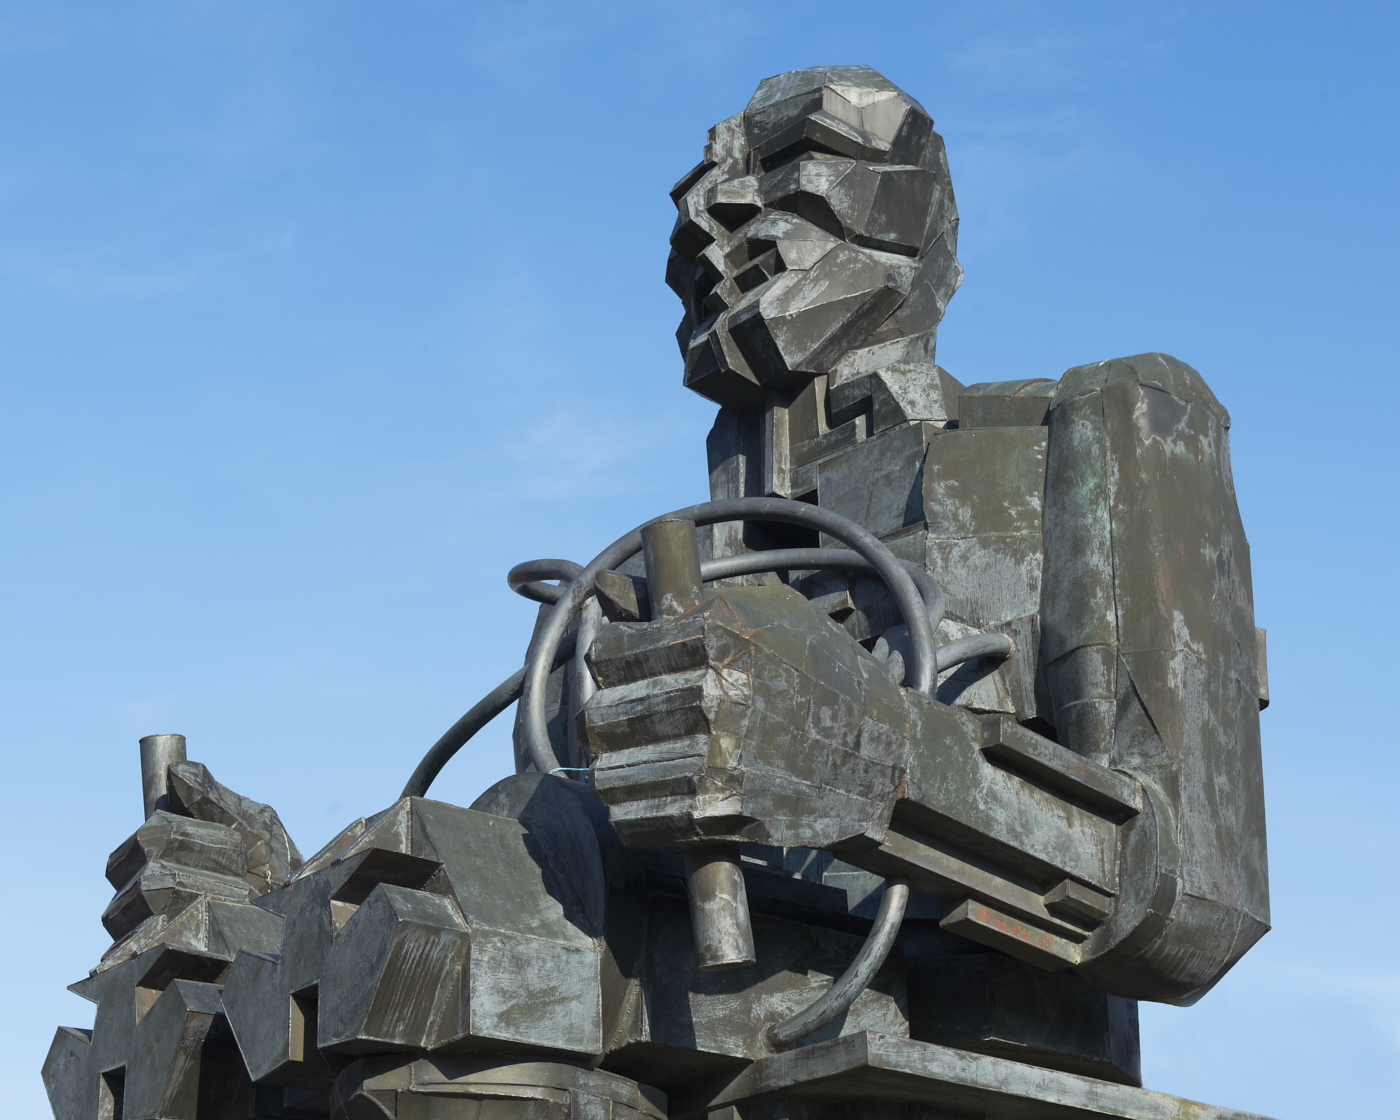 Upper body of seated bronze figure of Faraday sculpture by Eduardo Paolozzi with blue sky background